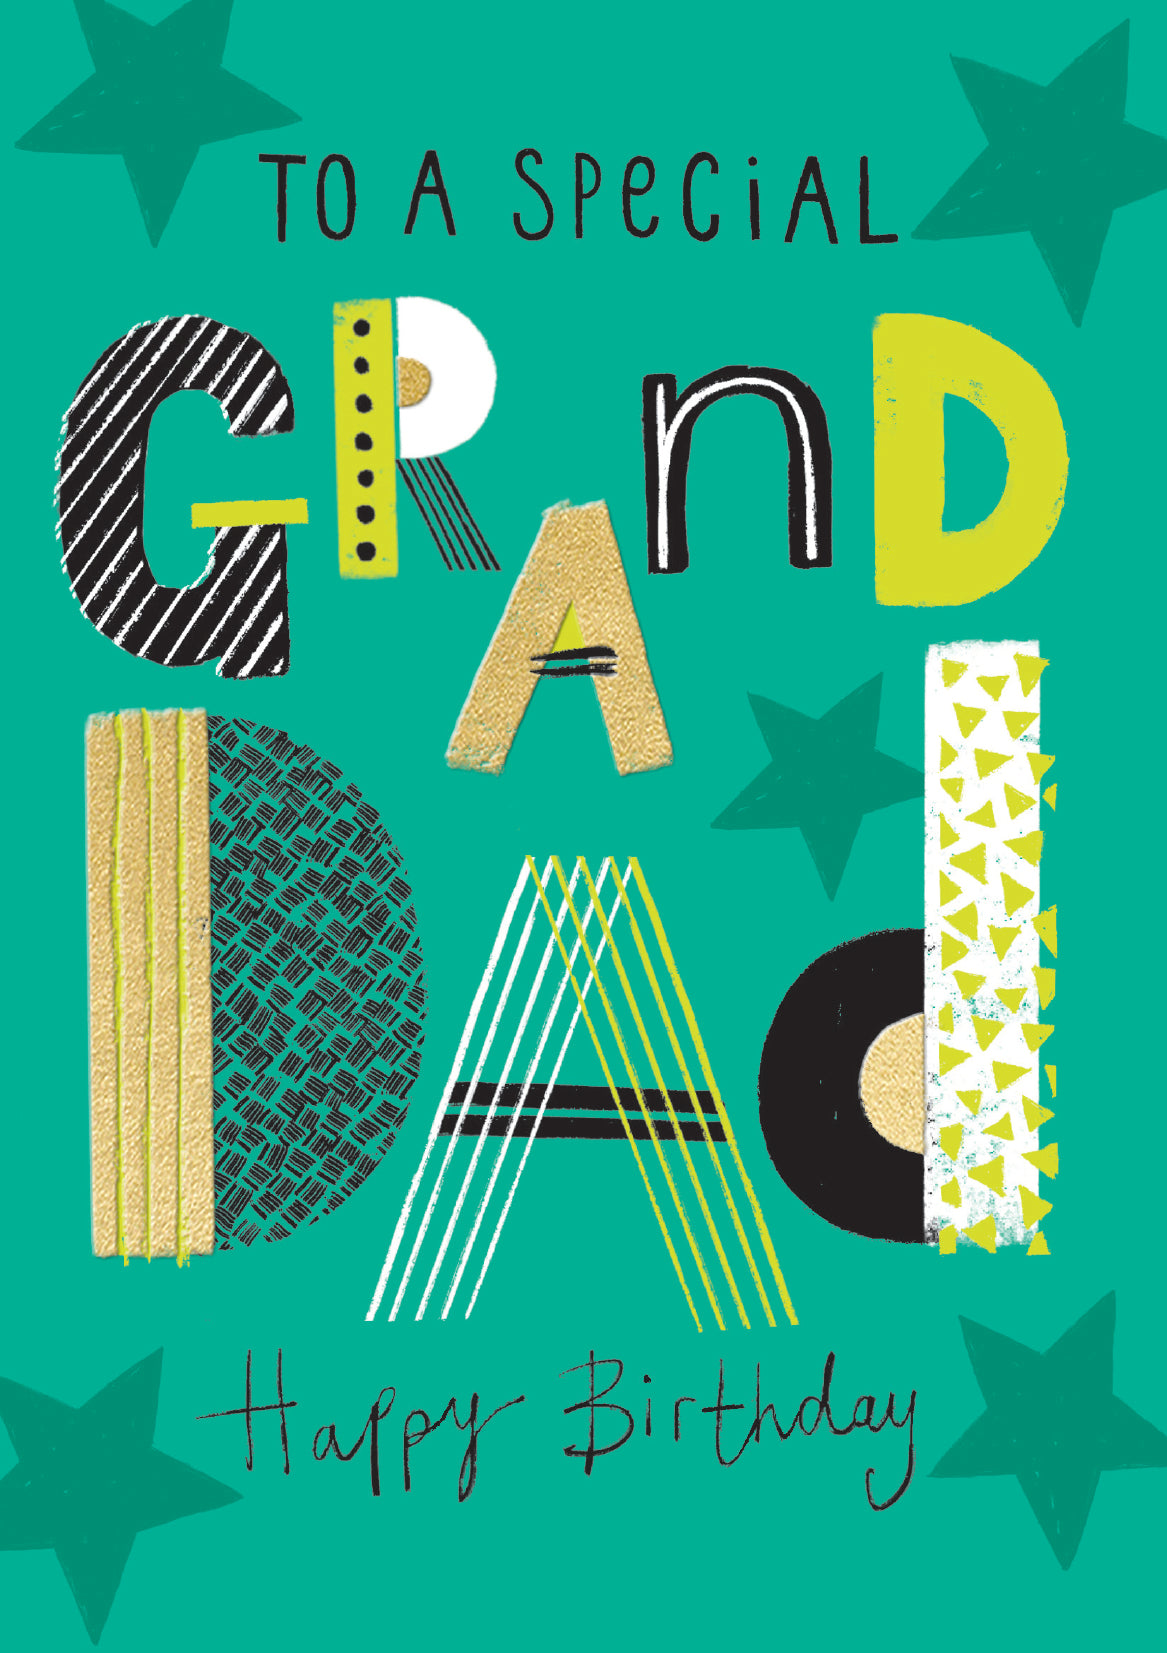 Teal Graphic Special Grandad Birthday Card from Penny Black